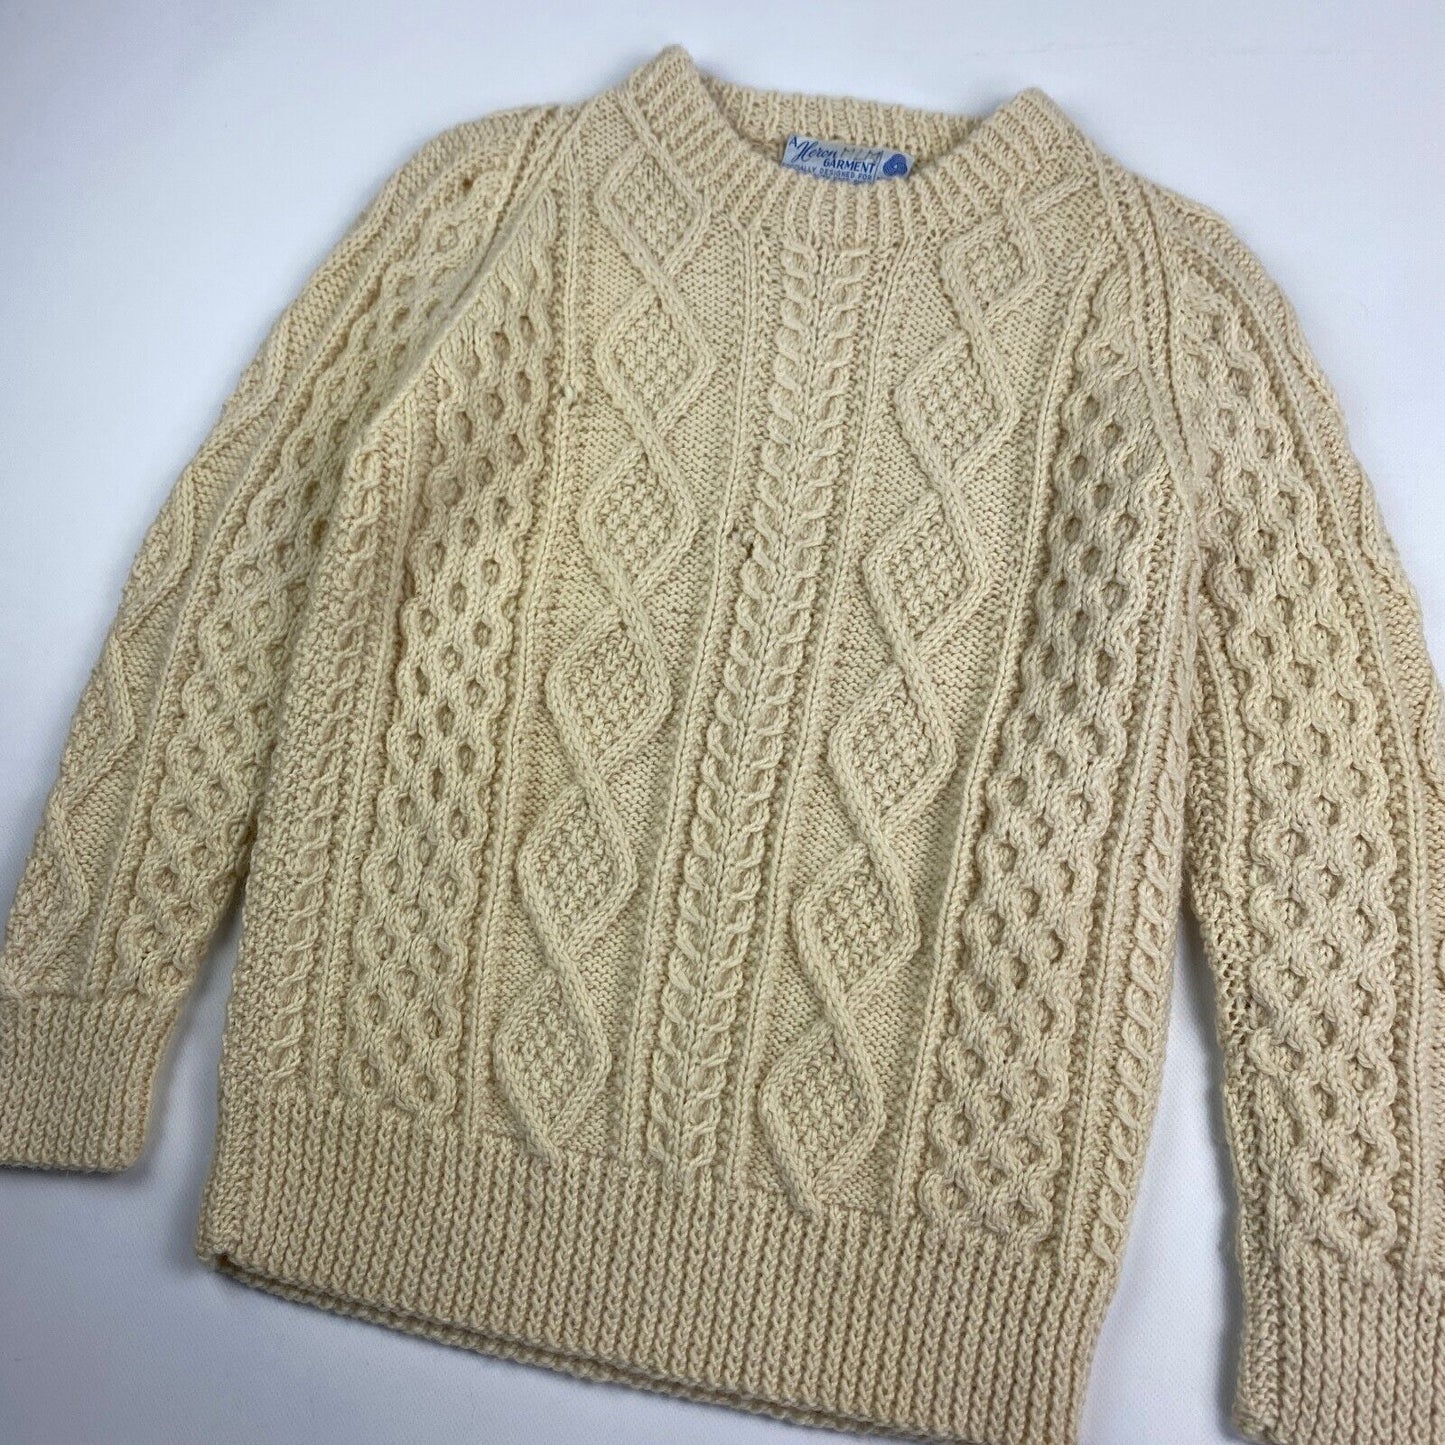 VINTAGE 80s Heavy Cream Wool Cable Knit Sweater sz Small Men